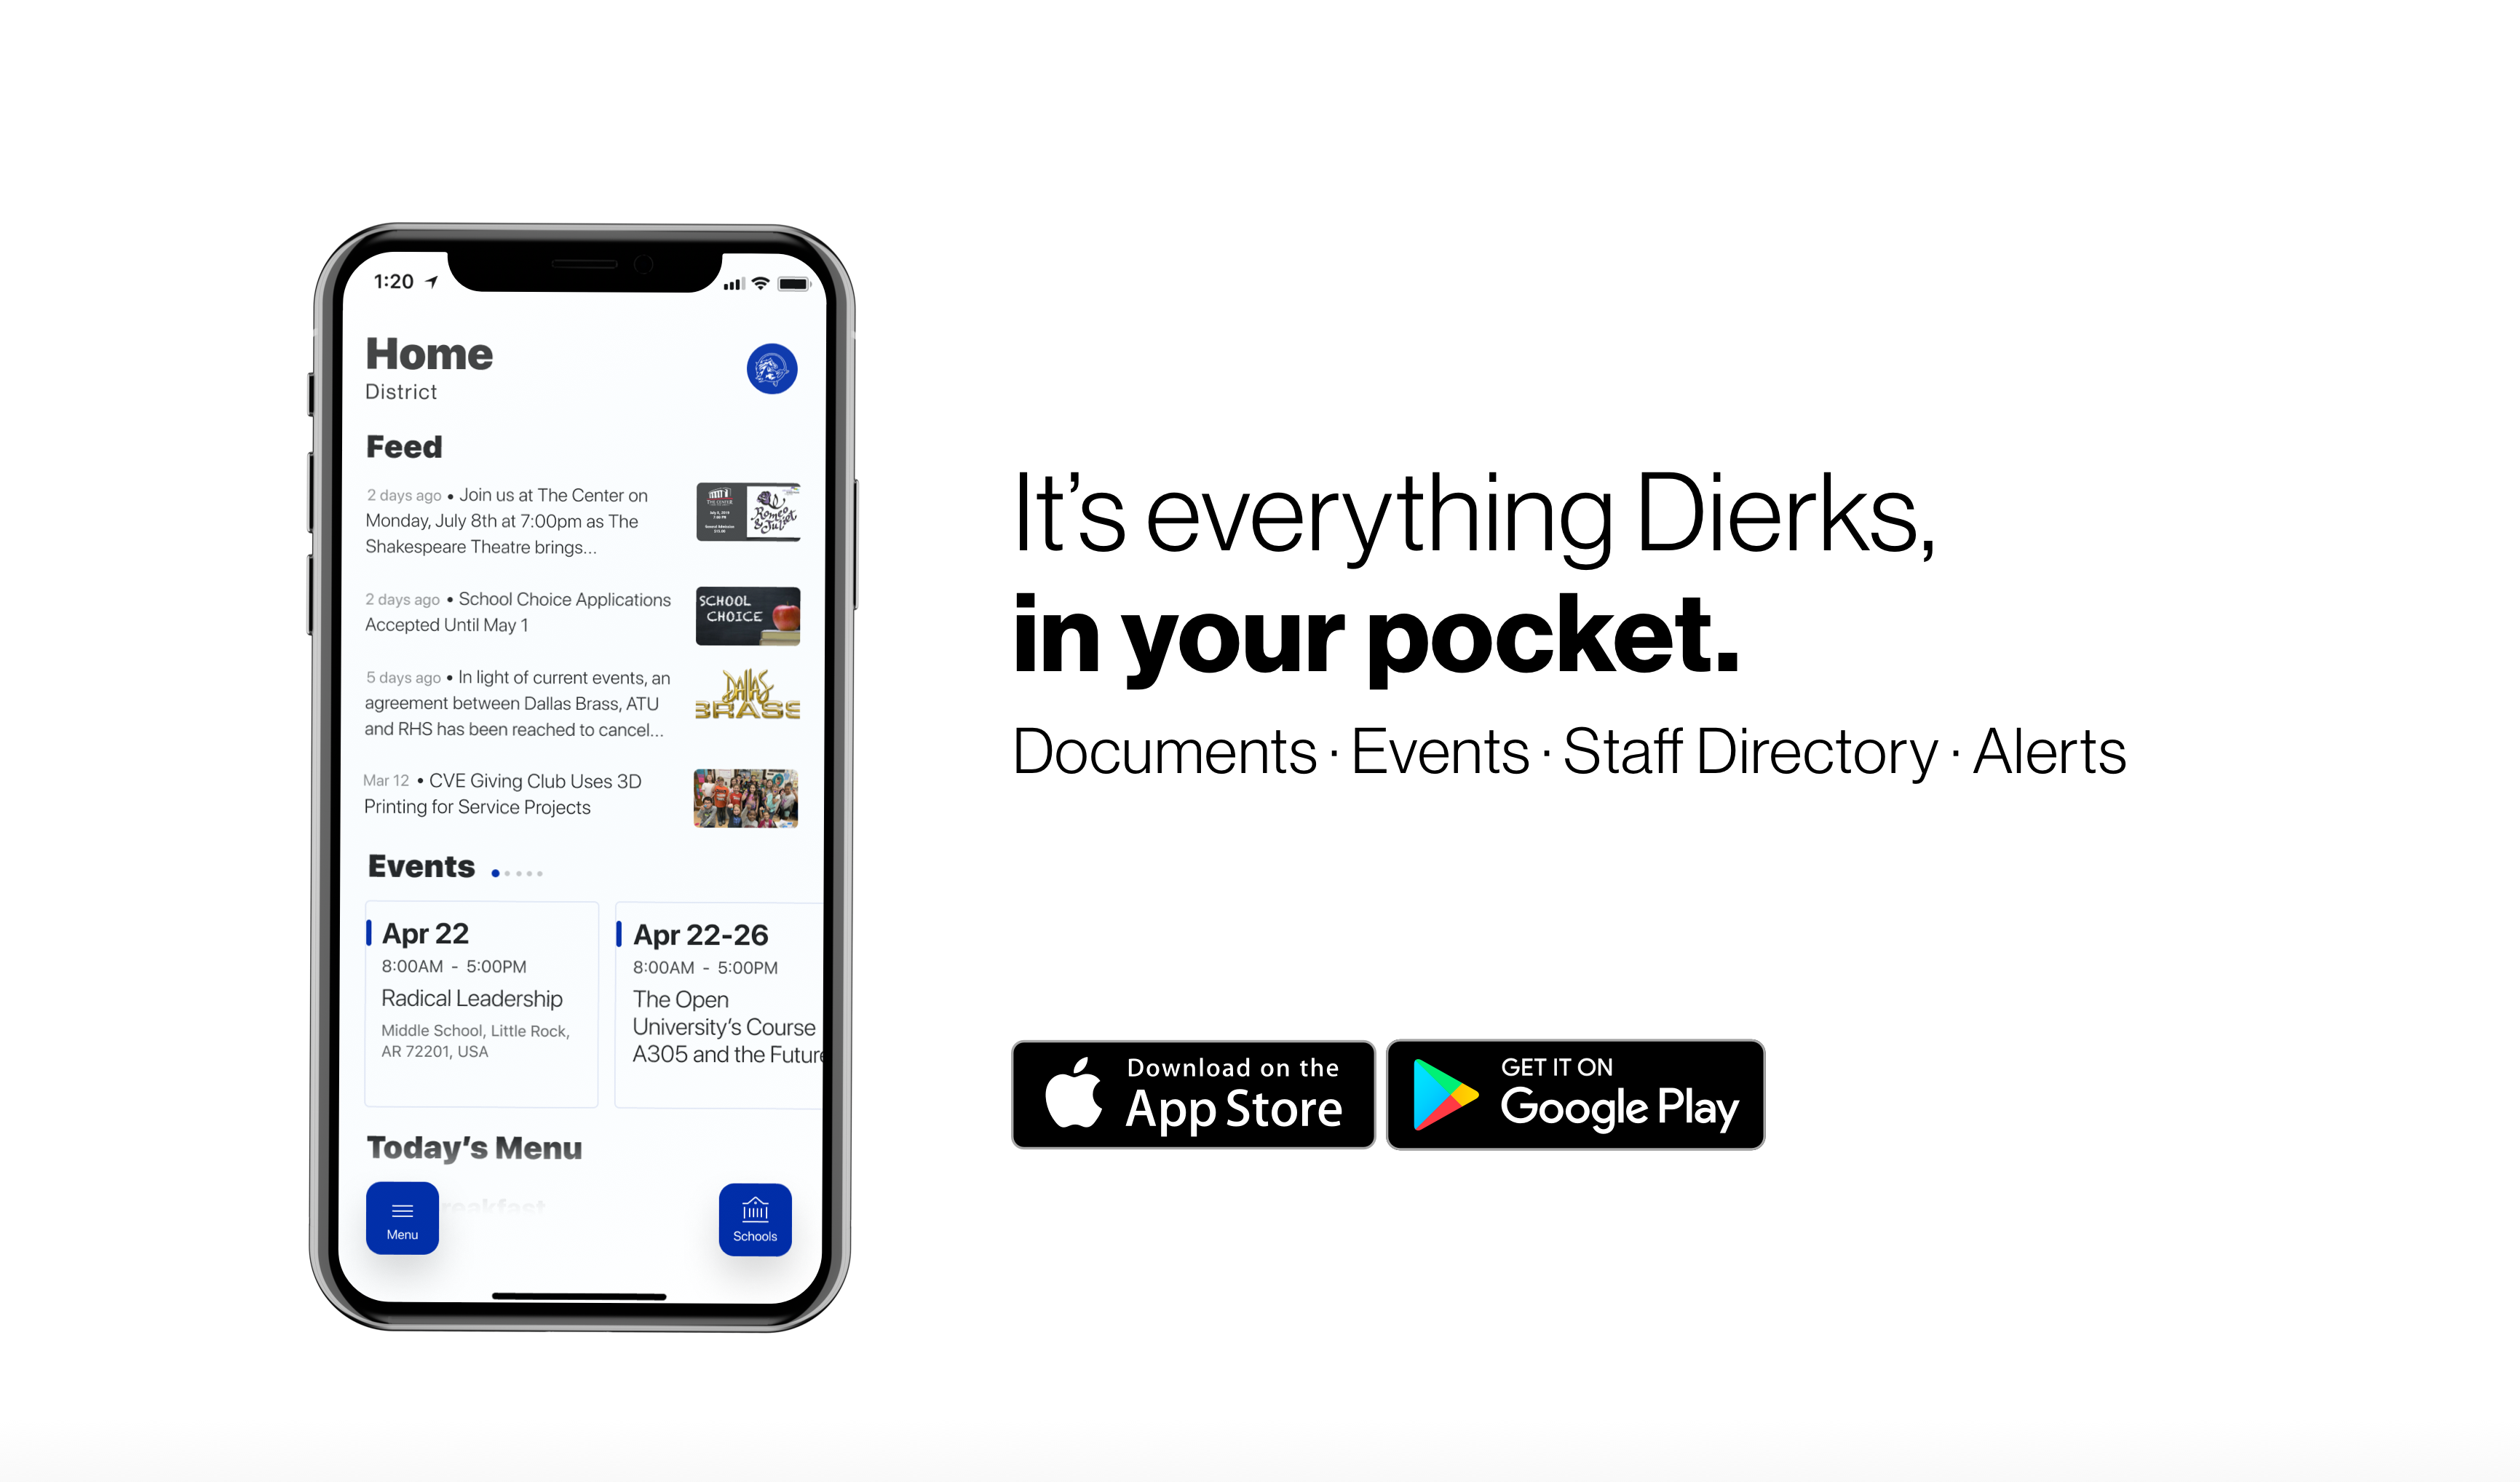 It's everything Dierk, in your pocket. Go and download our new app from the App store and Google Play store.